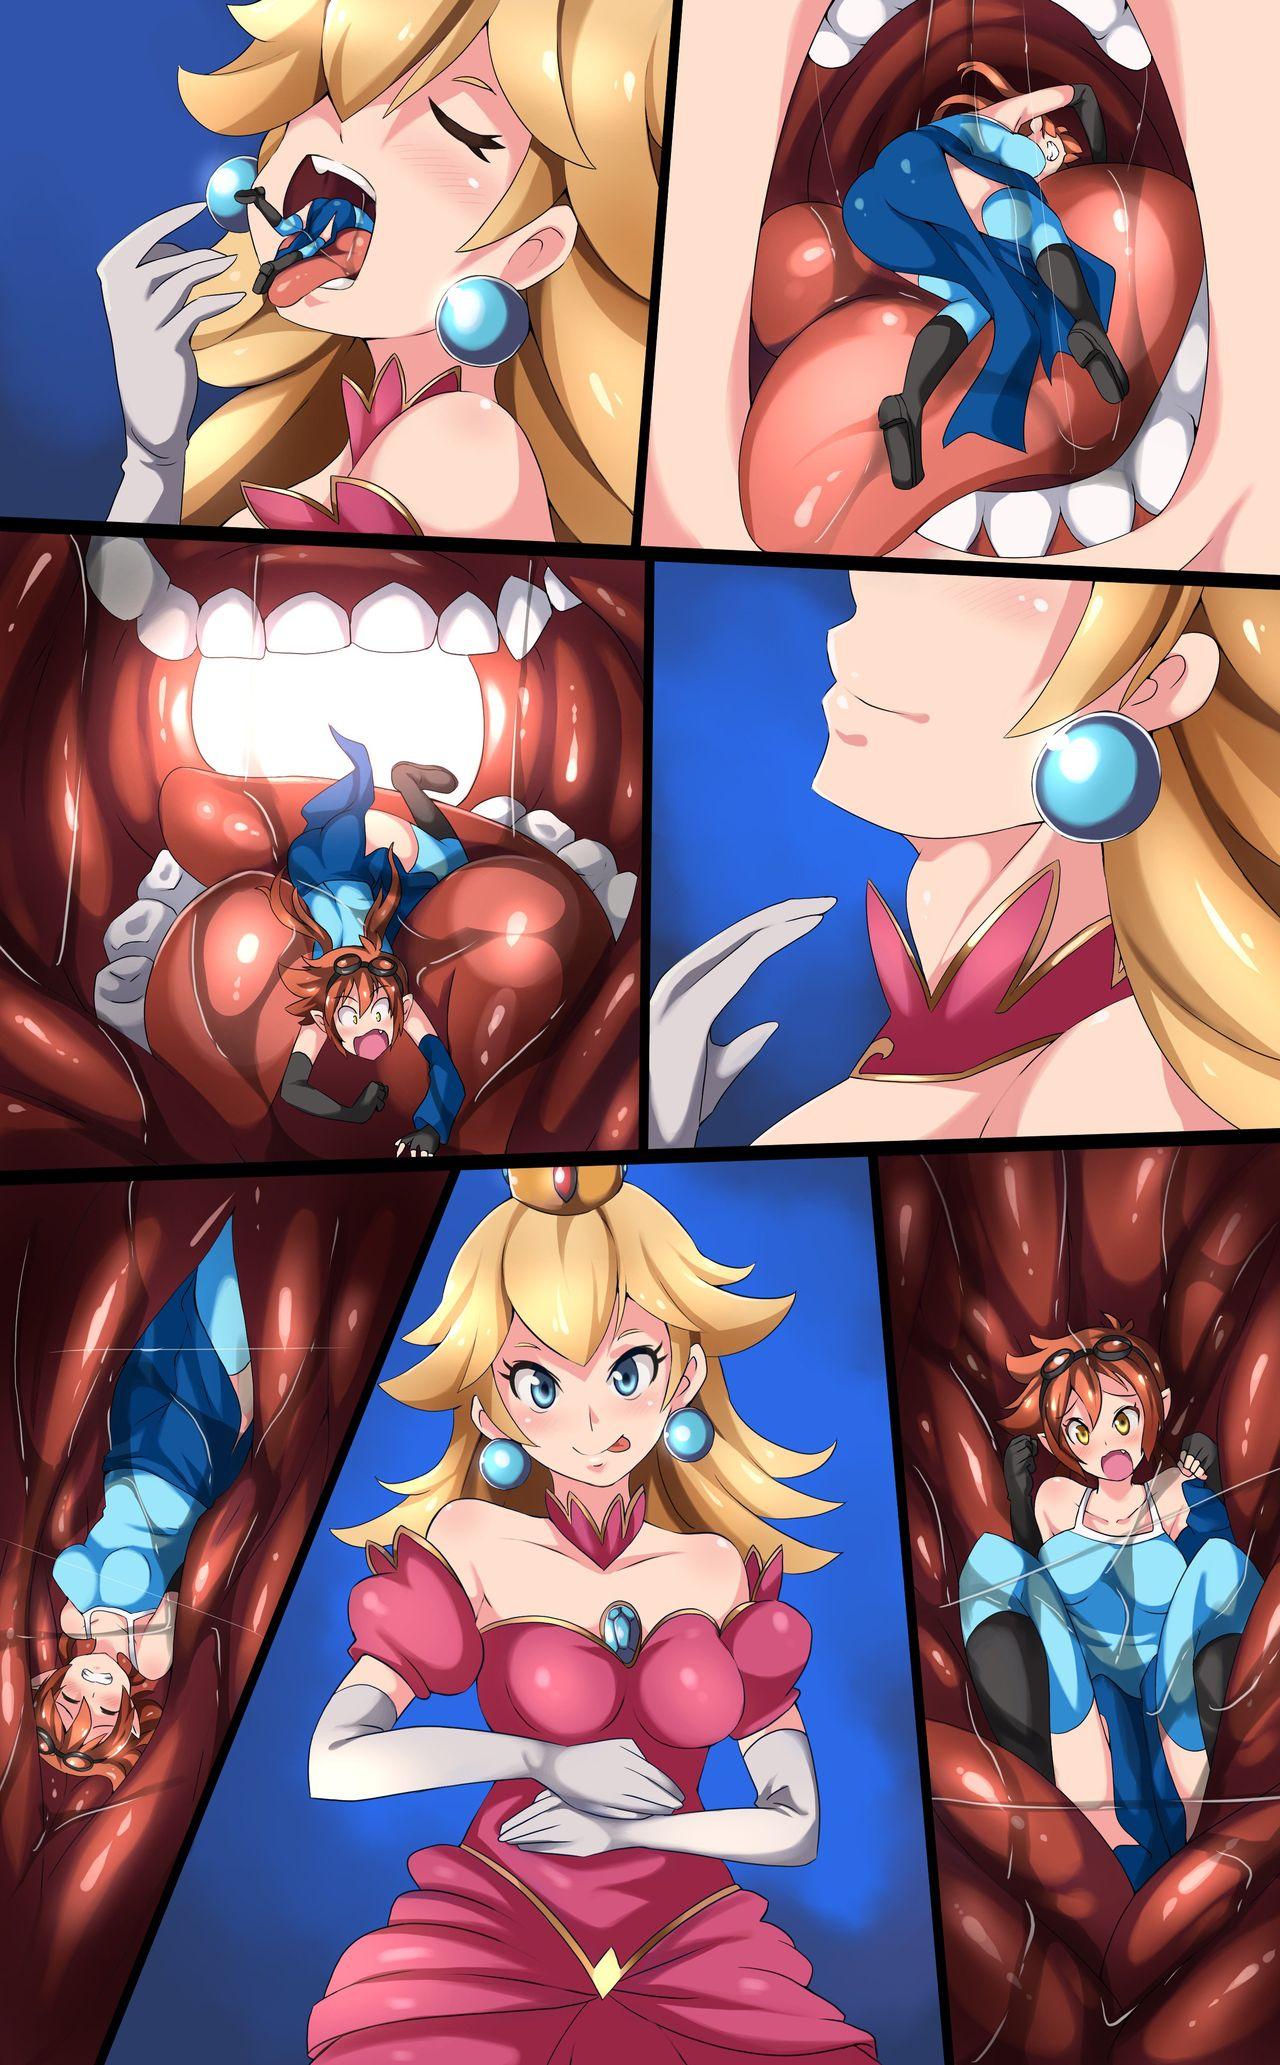 Facial Peach eats Jessica - Super mario brothers Anal - Page 3